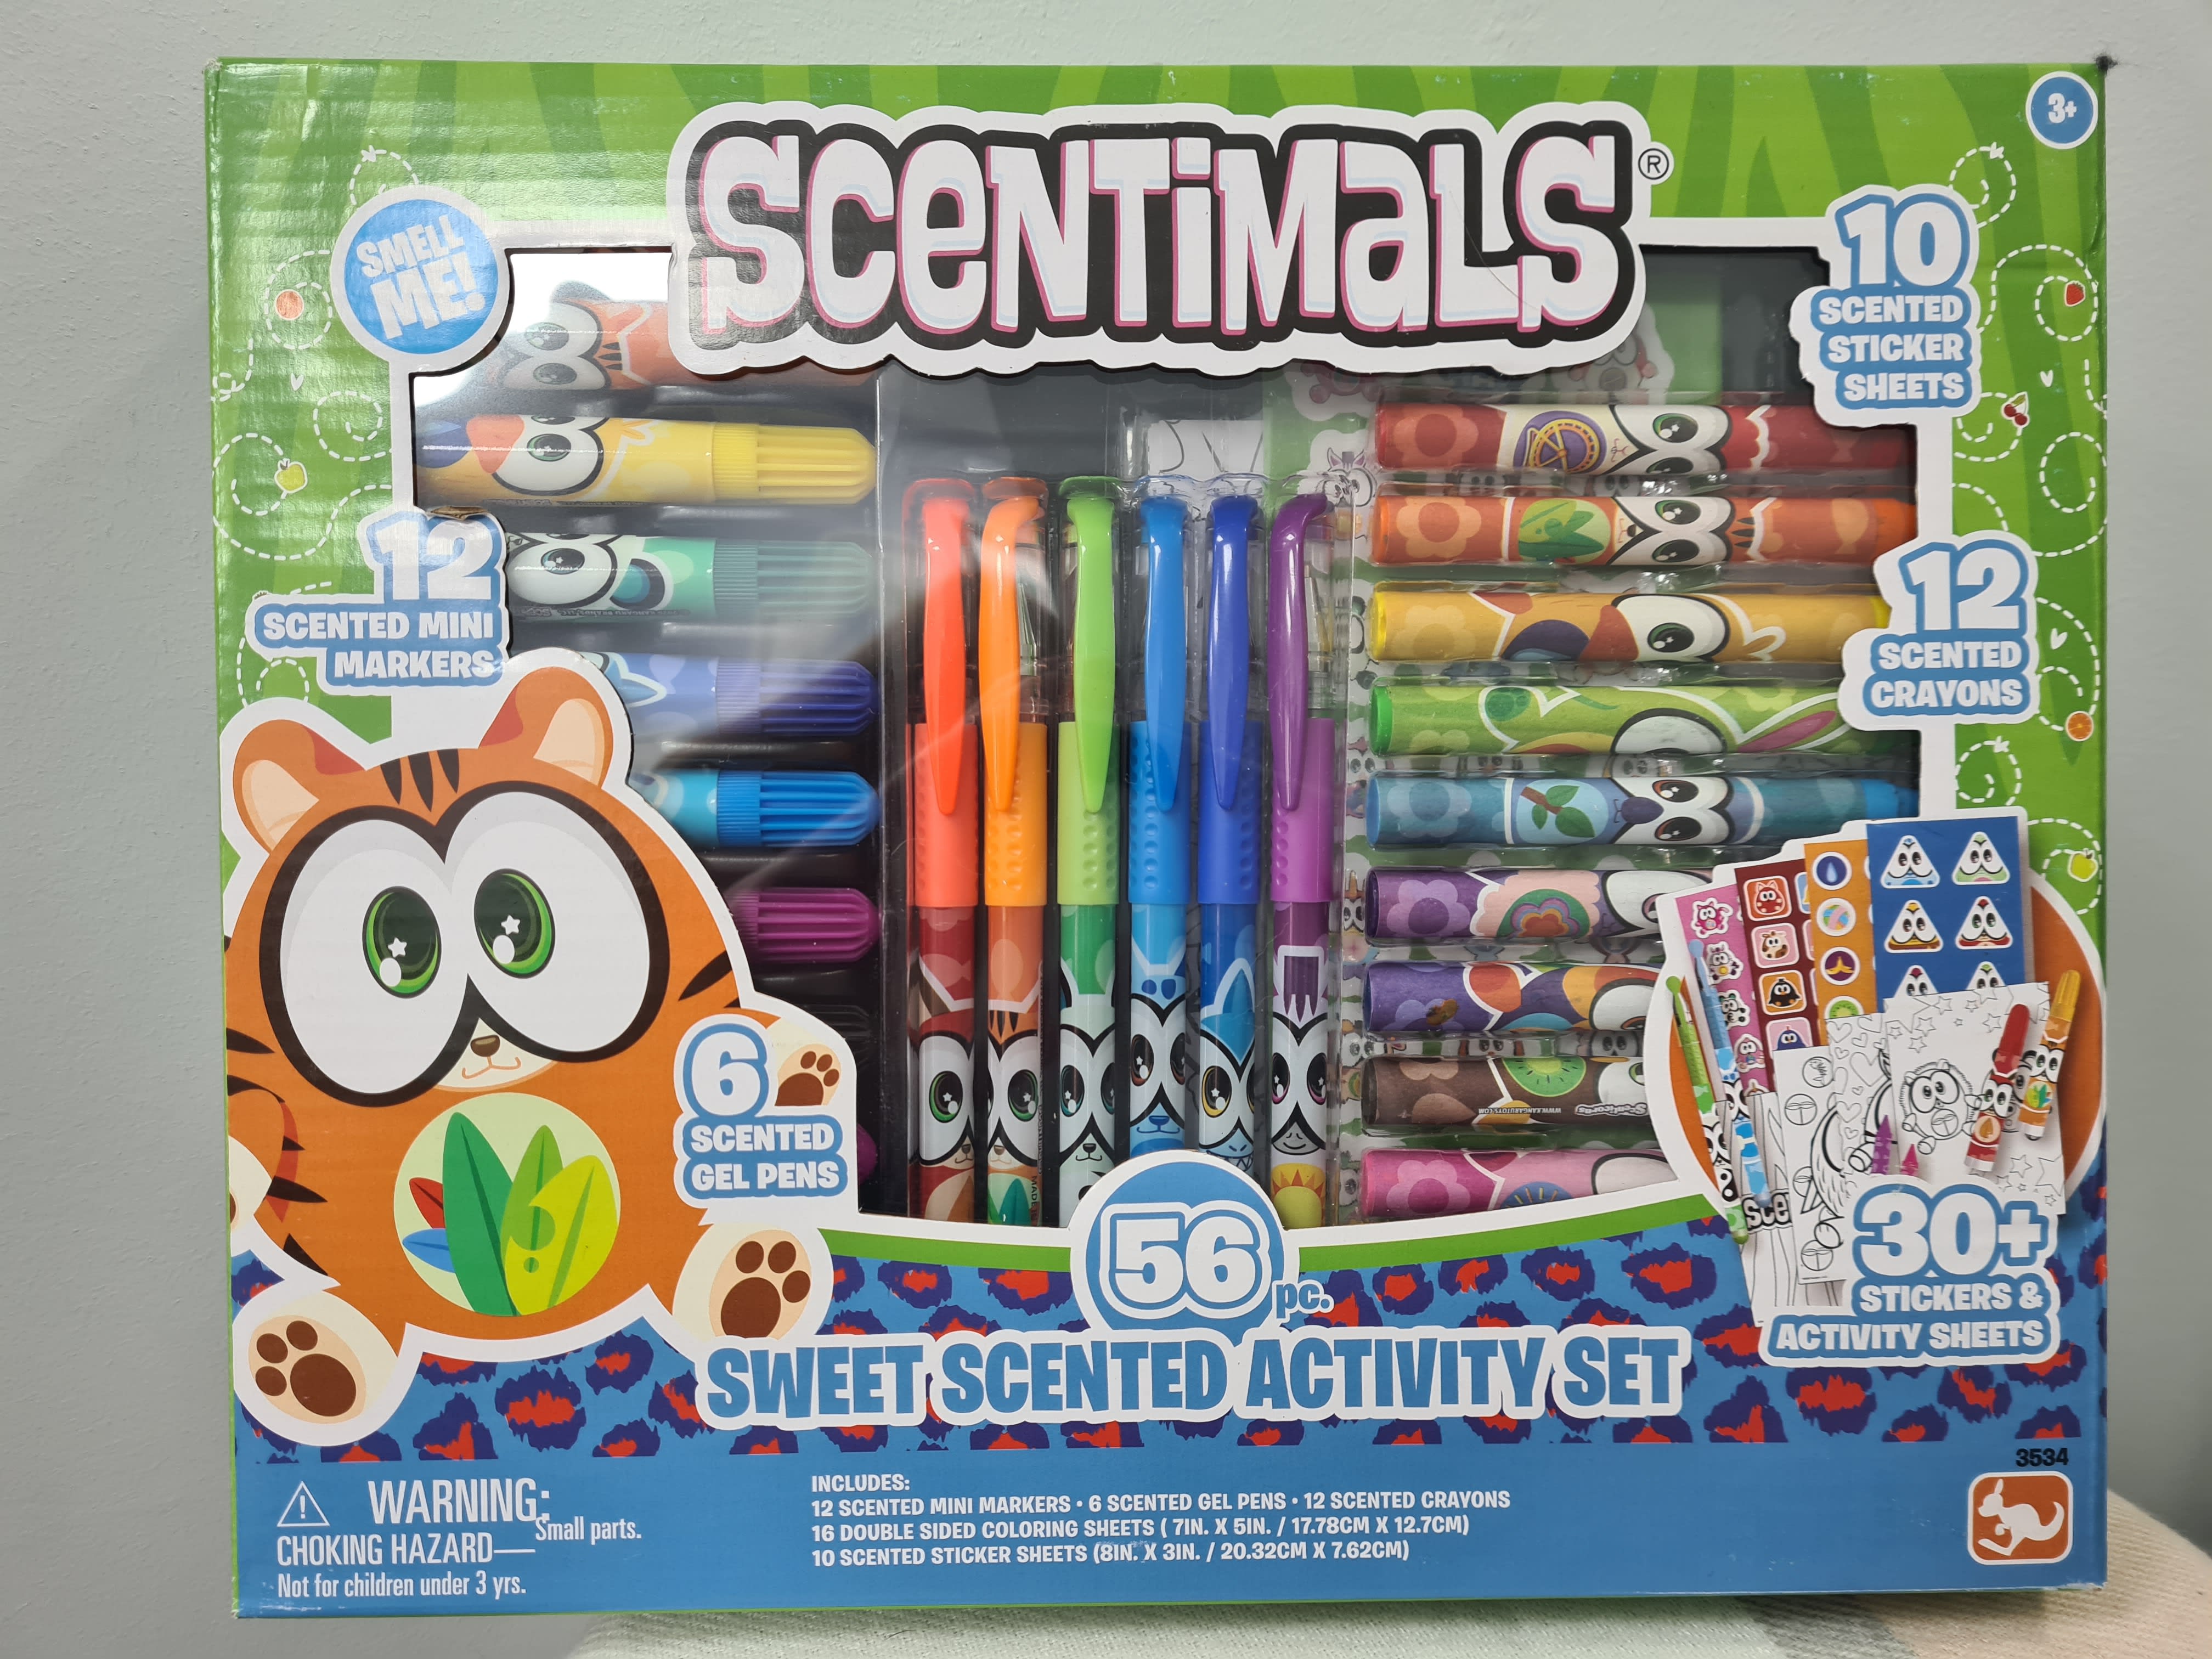 Scenticorns art supplies, coloring set, drawing kit, book - scentimals  sweet scented activity set - kids art supplies - markers, crayons